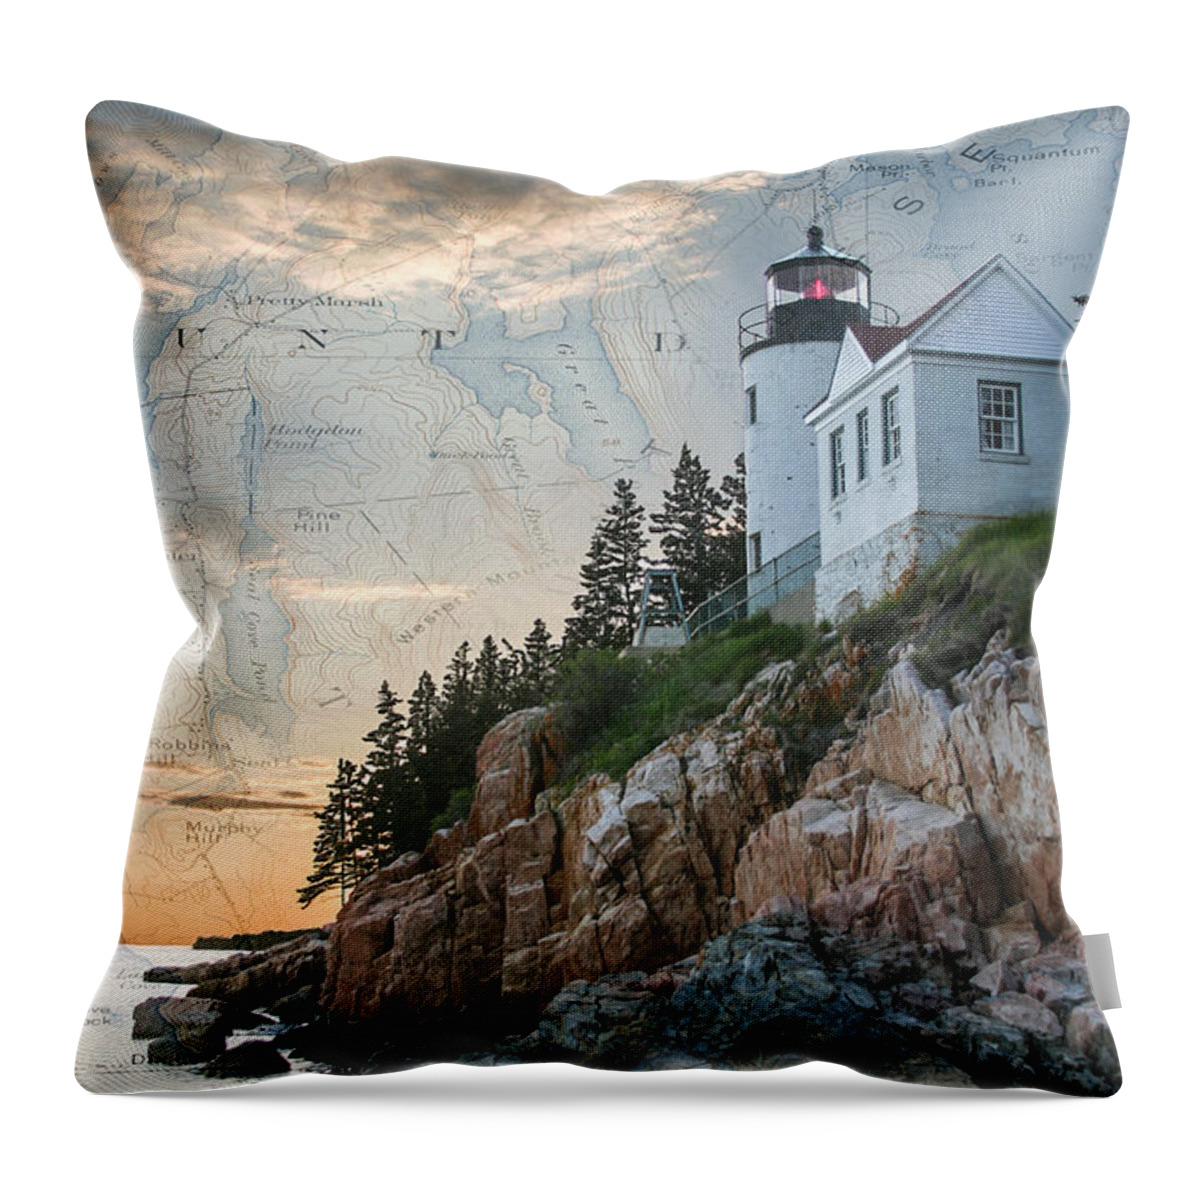  Throw Pillow featuring the digital art Bass Harbor lighthouse on Maine nautical chart by Jeff Folger